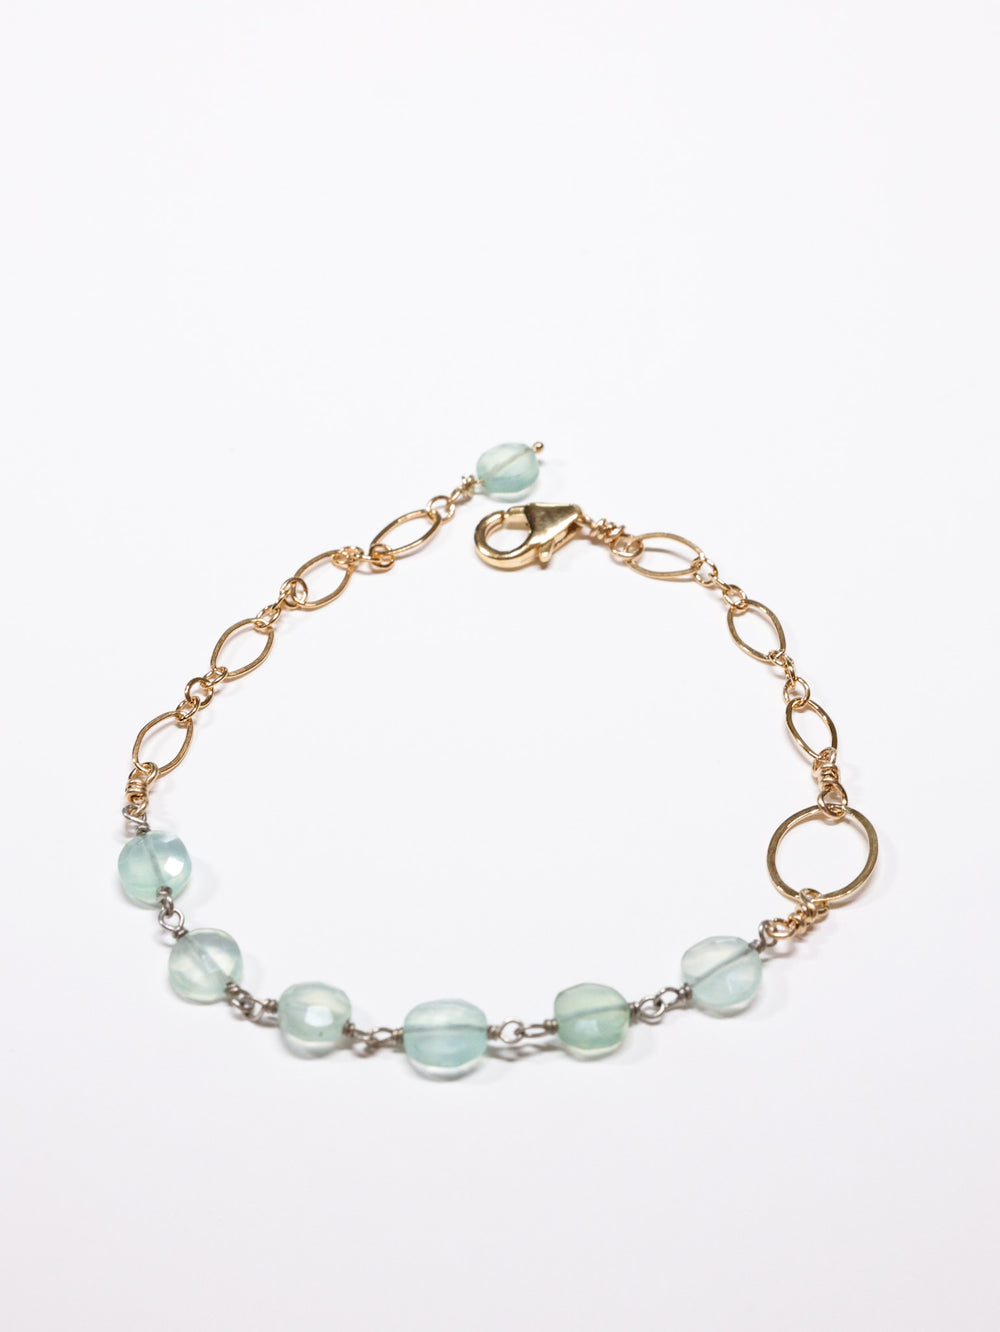 Tina Peruvian Chalcedony Bracelet in Gold Filled